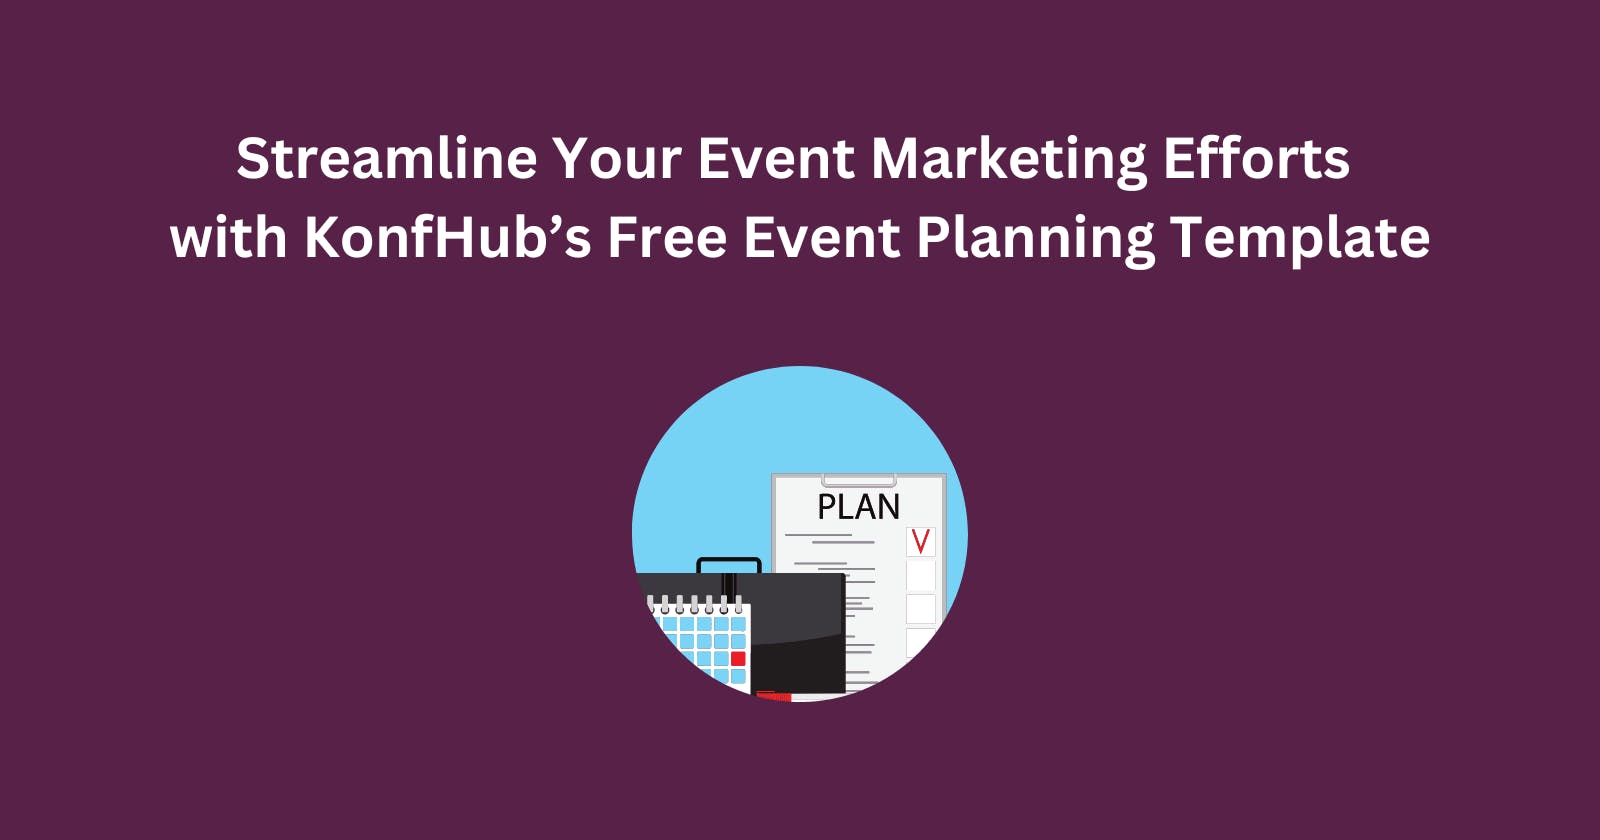 Streamline Your Event Marketing Efforts with KonfHub’s Free Event Planning Template